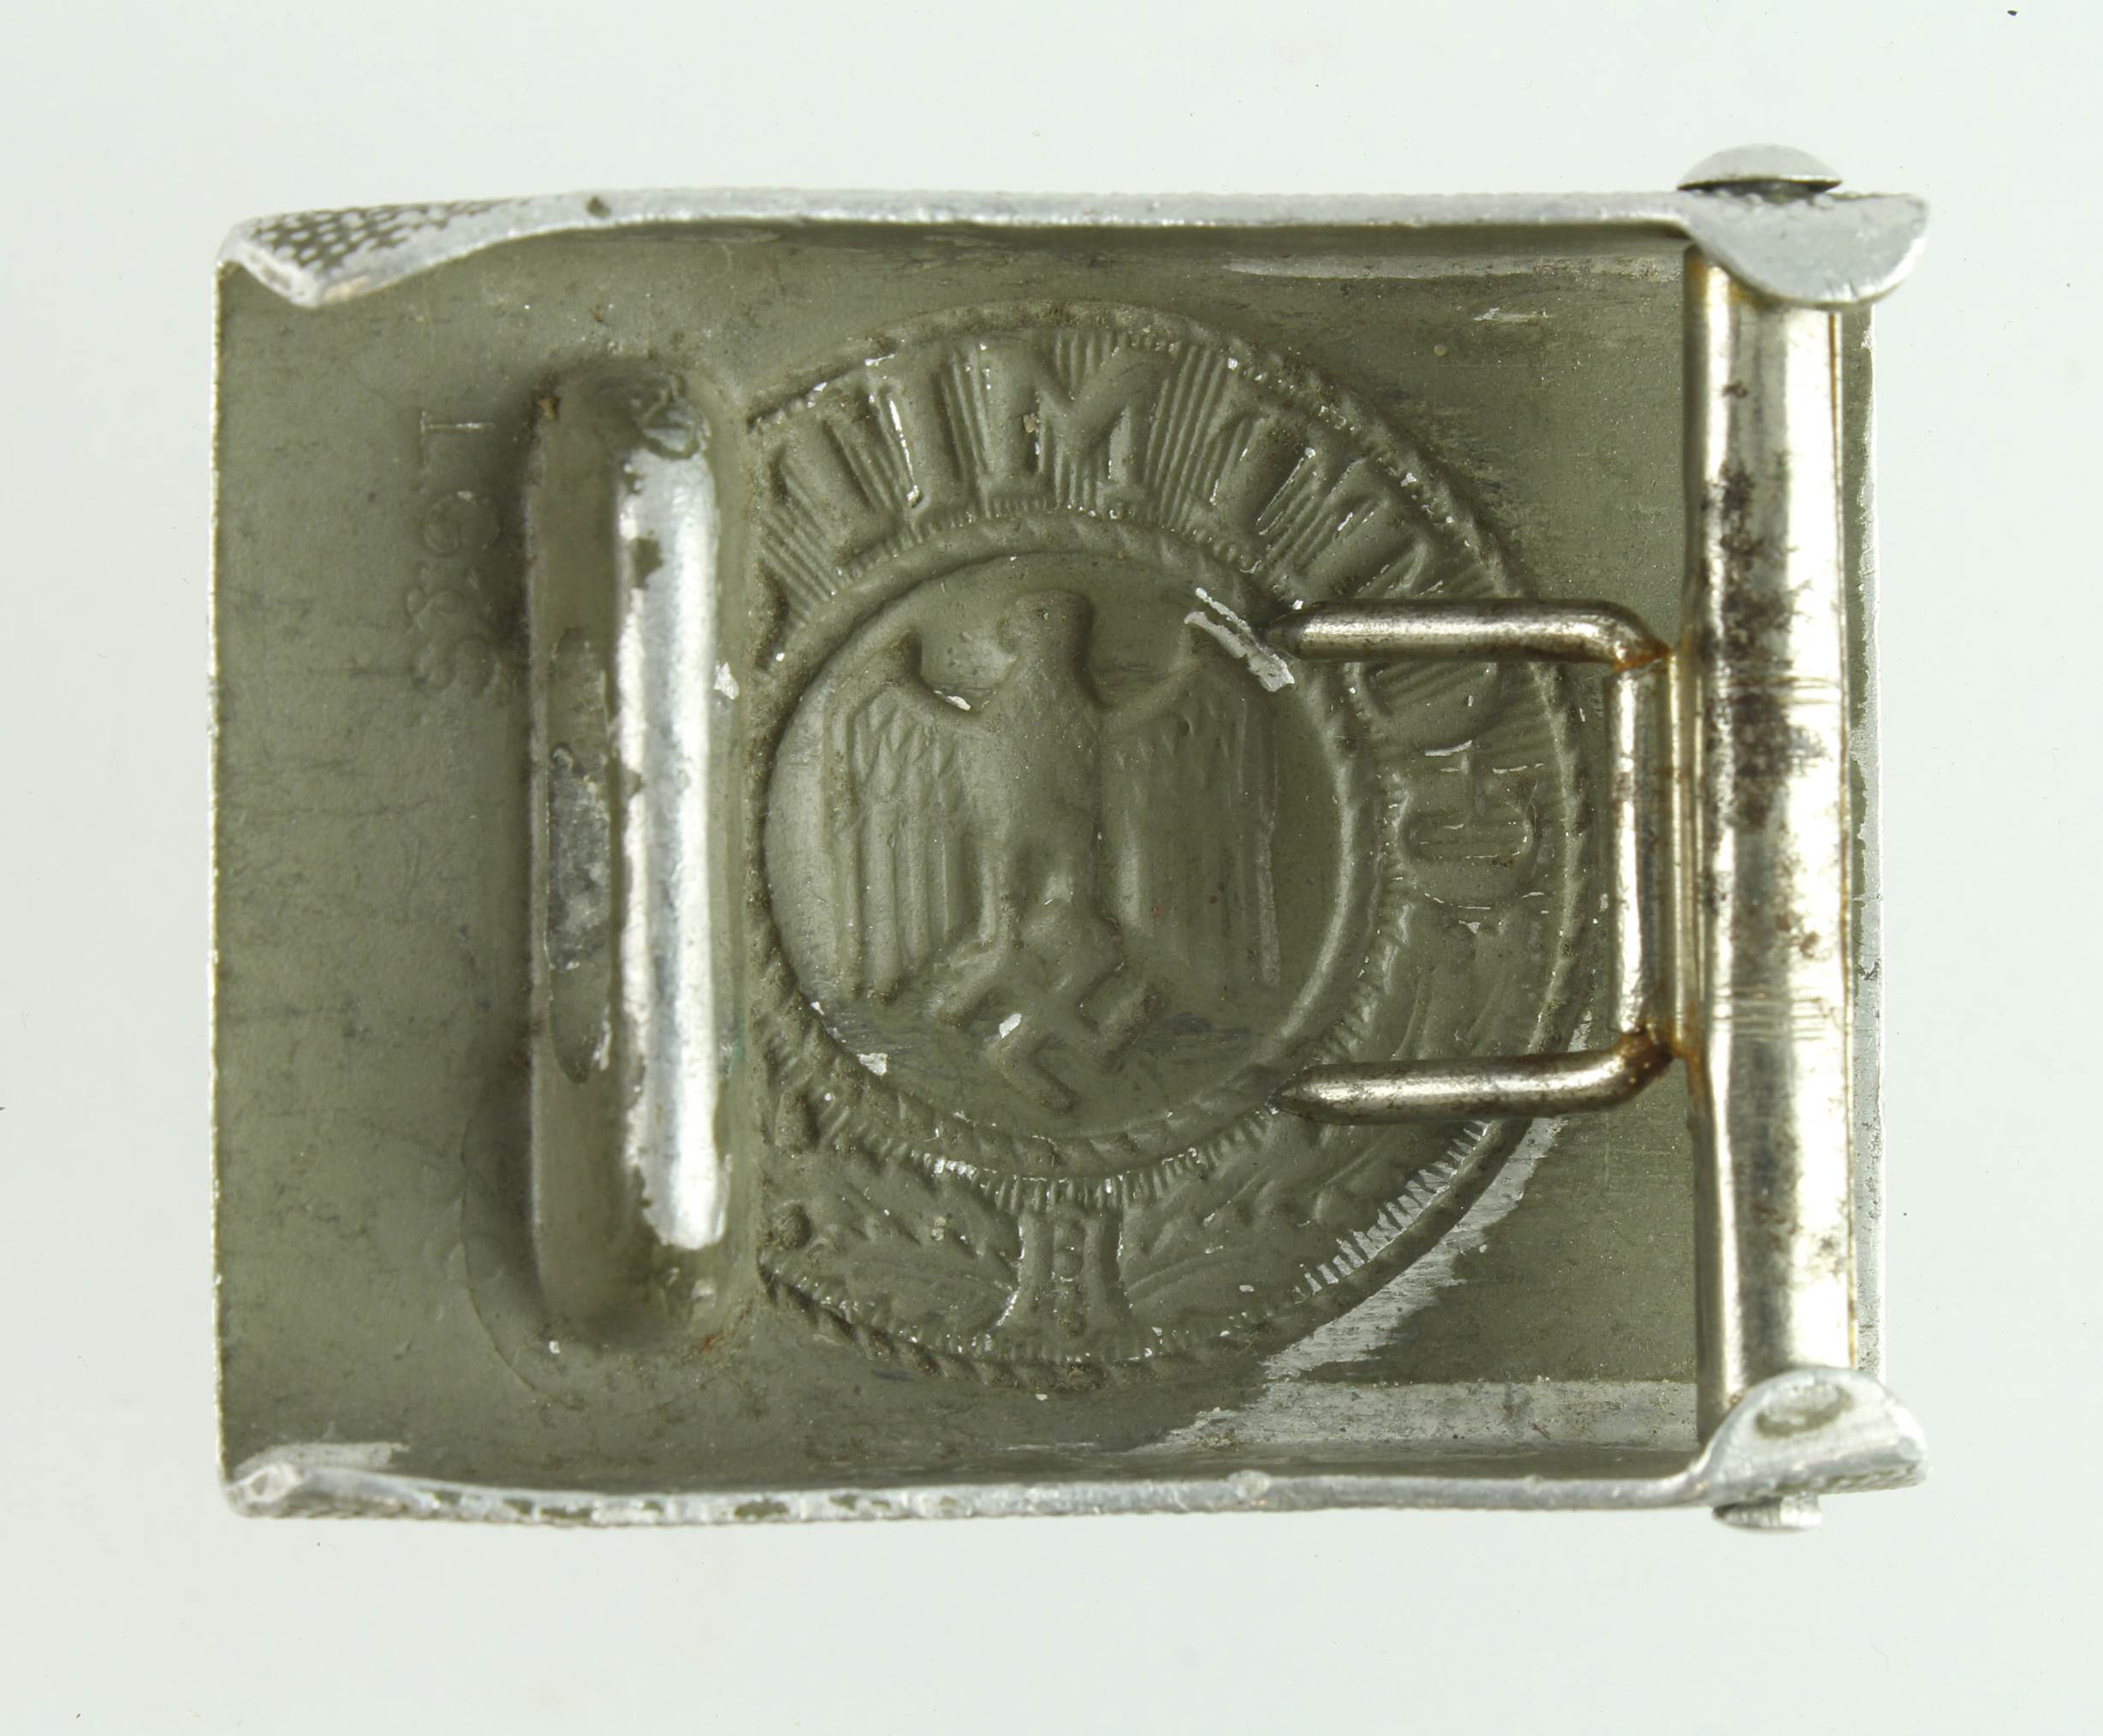 German 3rd Reich Army belt buckle, still with traces of green paint, maker marked 'L.G & S 39'. - Image 2 of 2